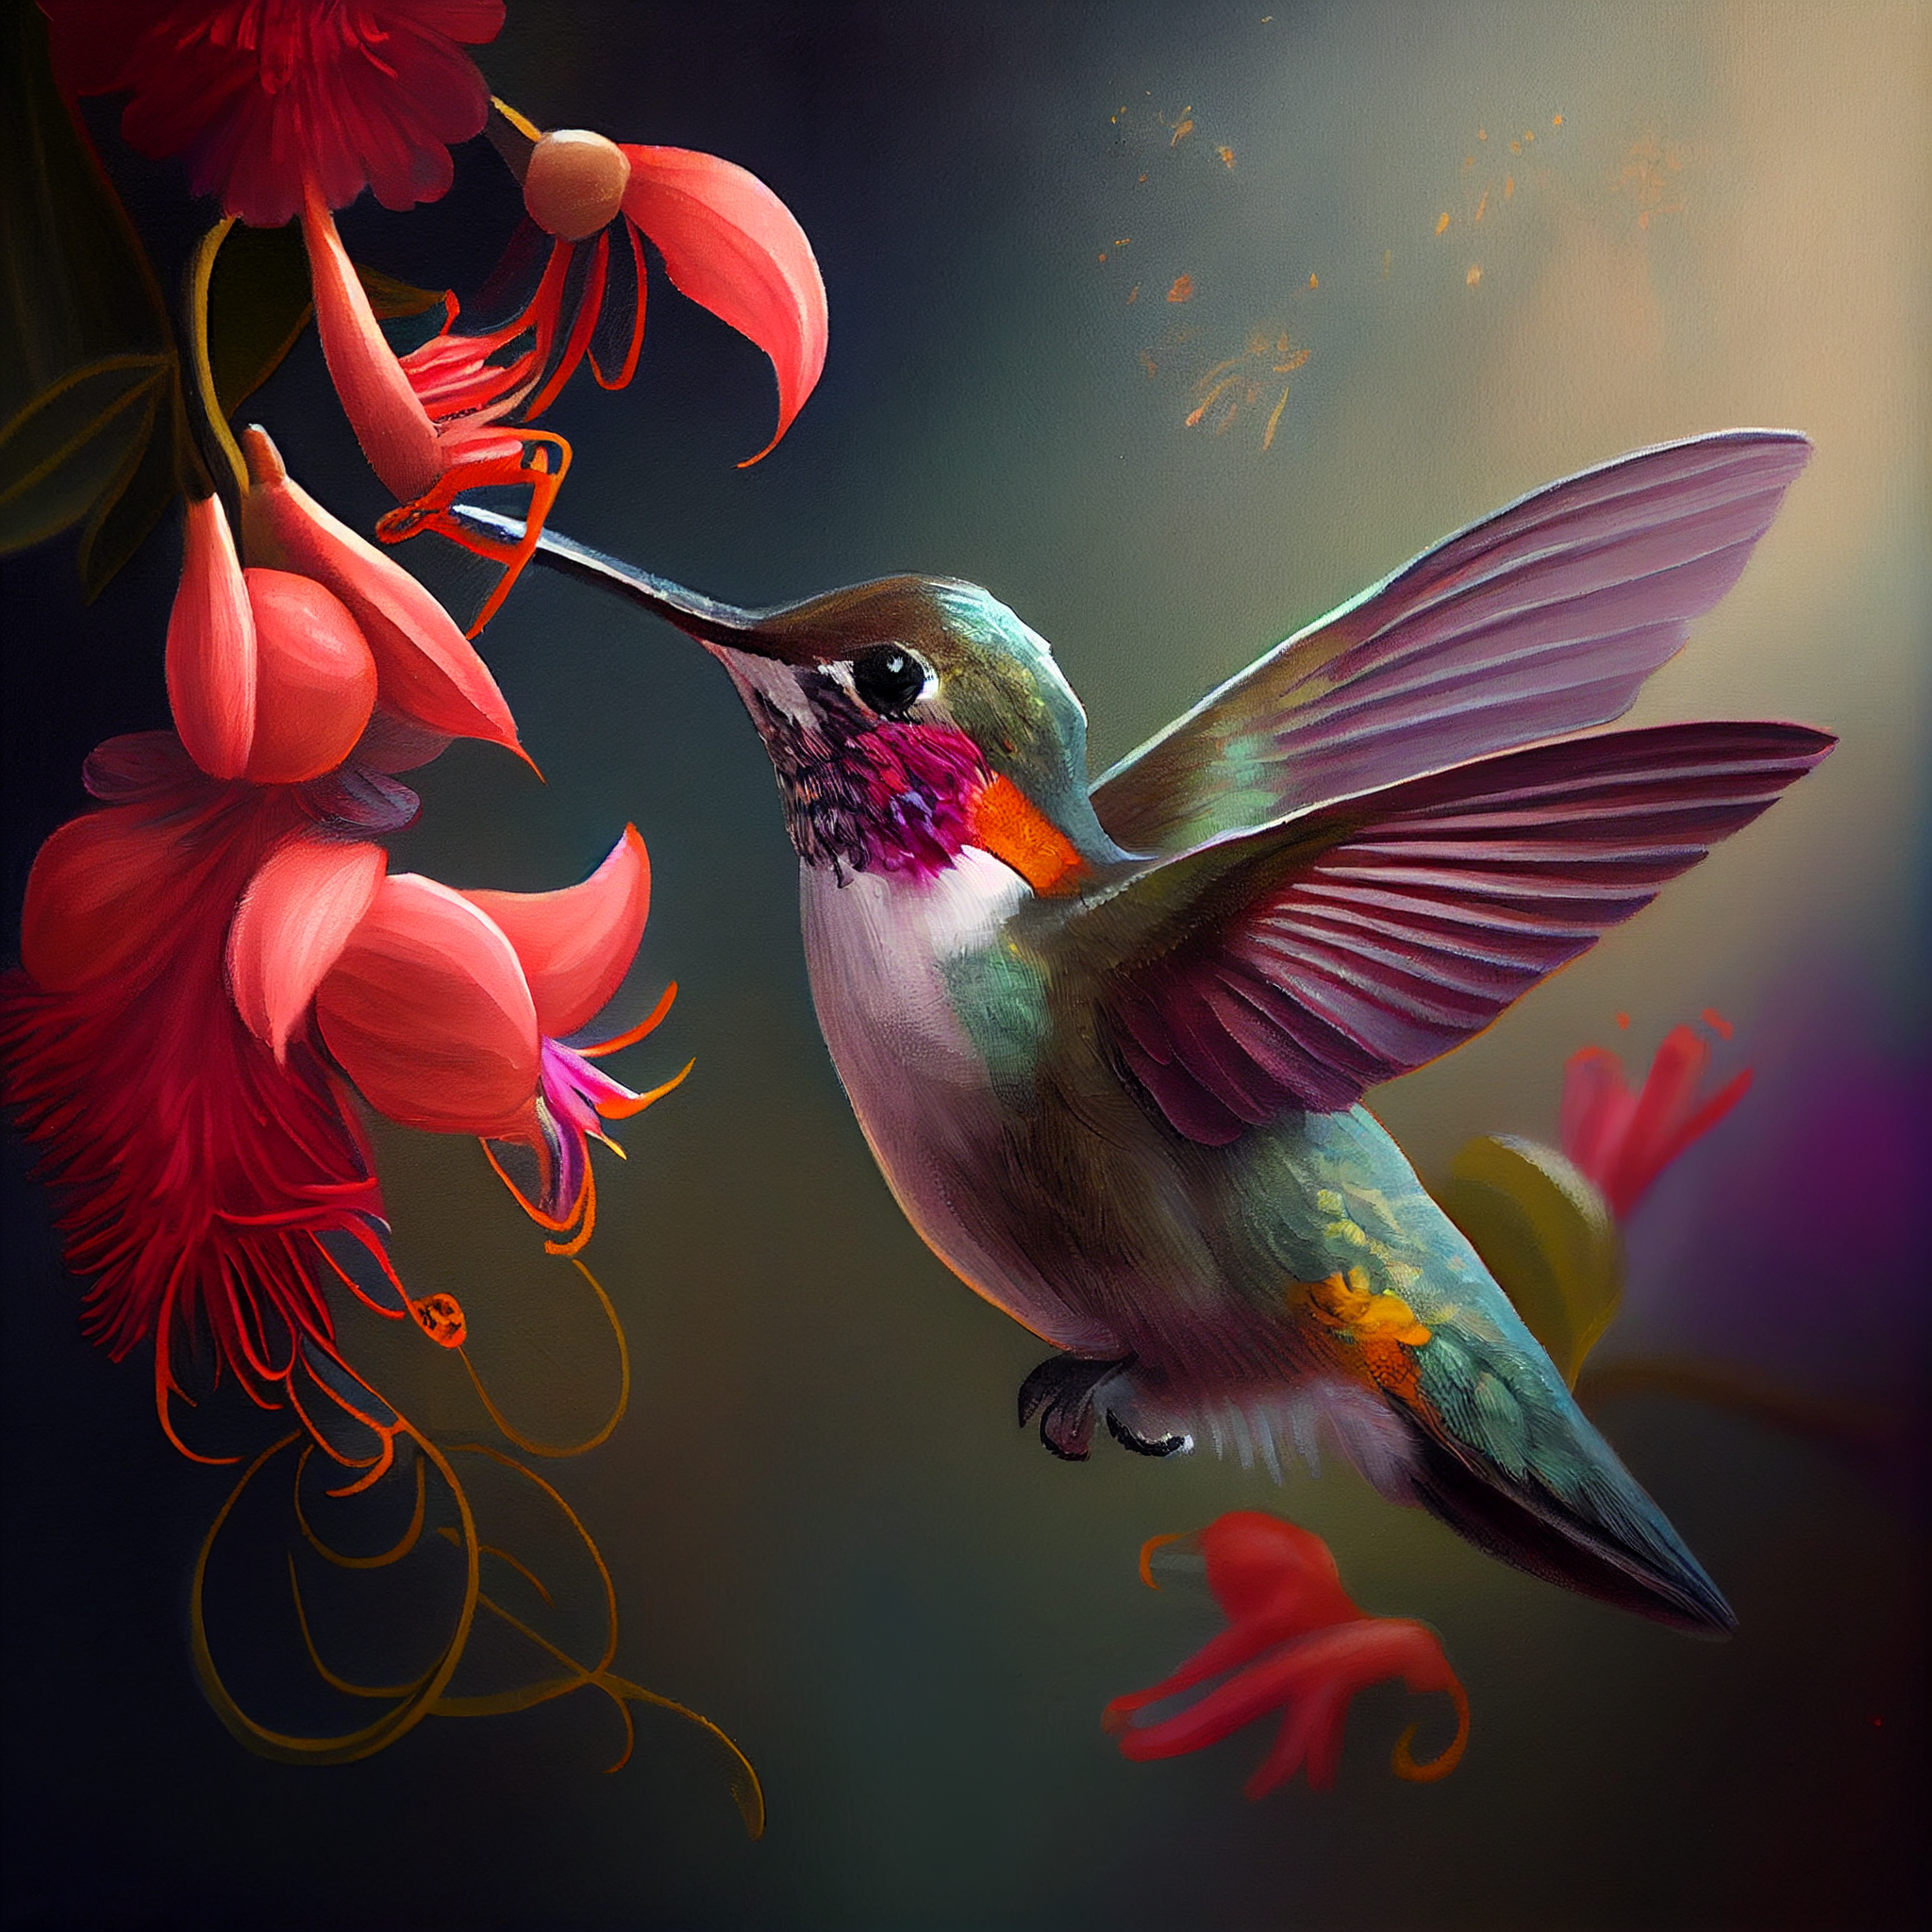 Graceful Wonder: A Realistic Art Print of a Hummingbird Nurturing Life from a Blossoming